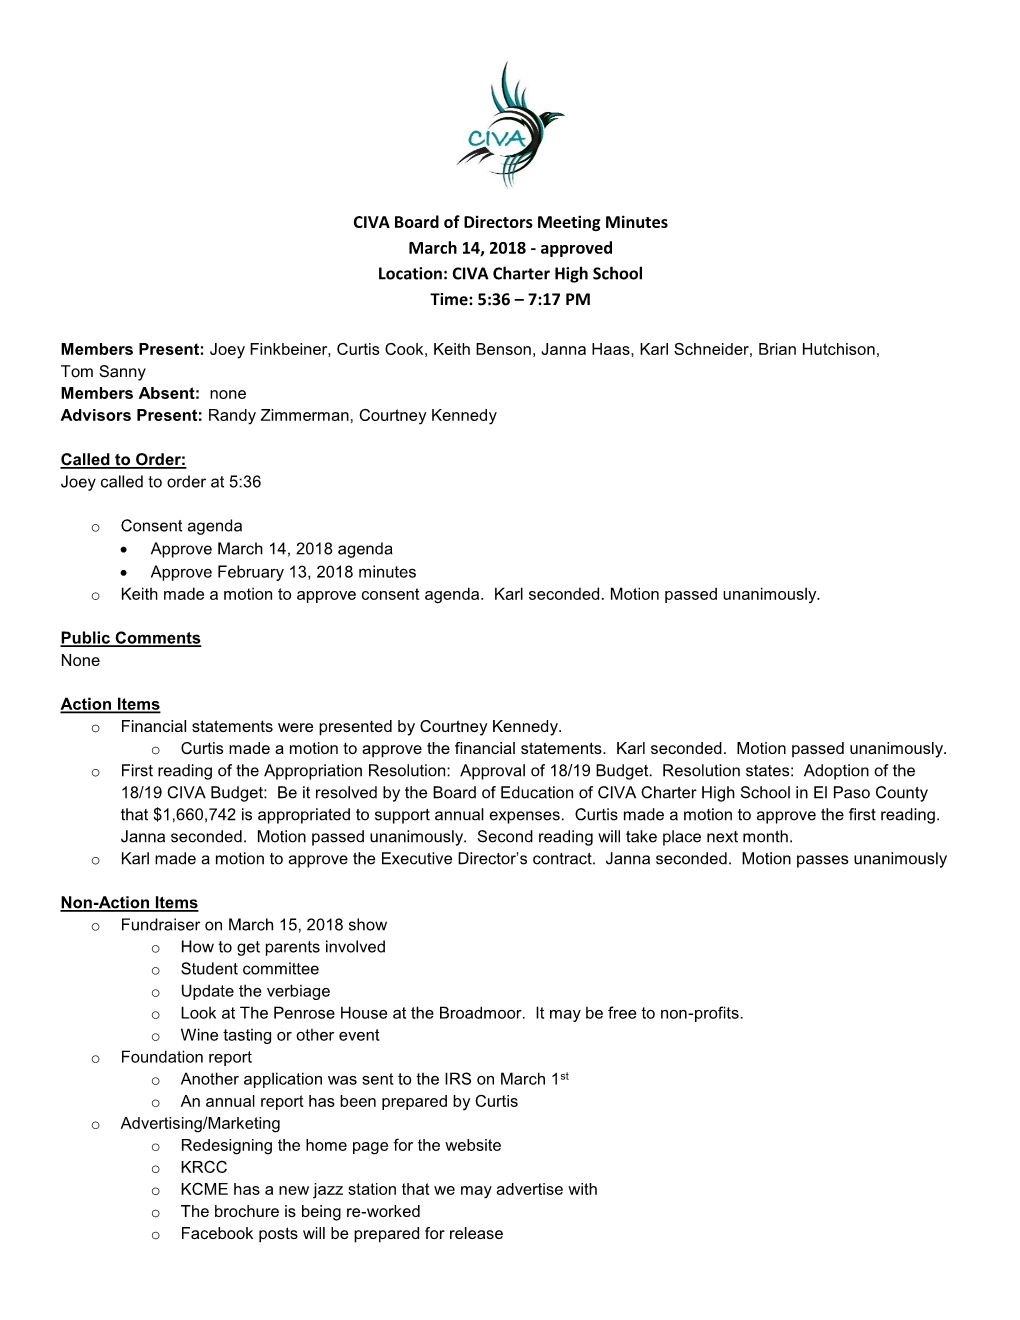 CIVA Board of Directors Meeting Minutes March 14, 2018 - Approved Location: CIVA Charter High School Time: 5:36 – 7:17 PM